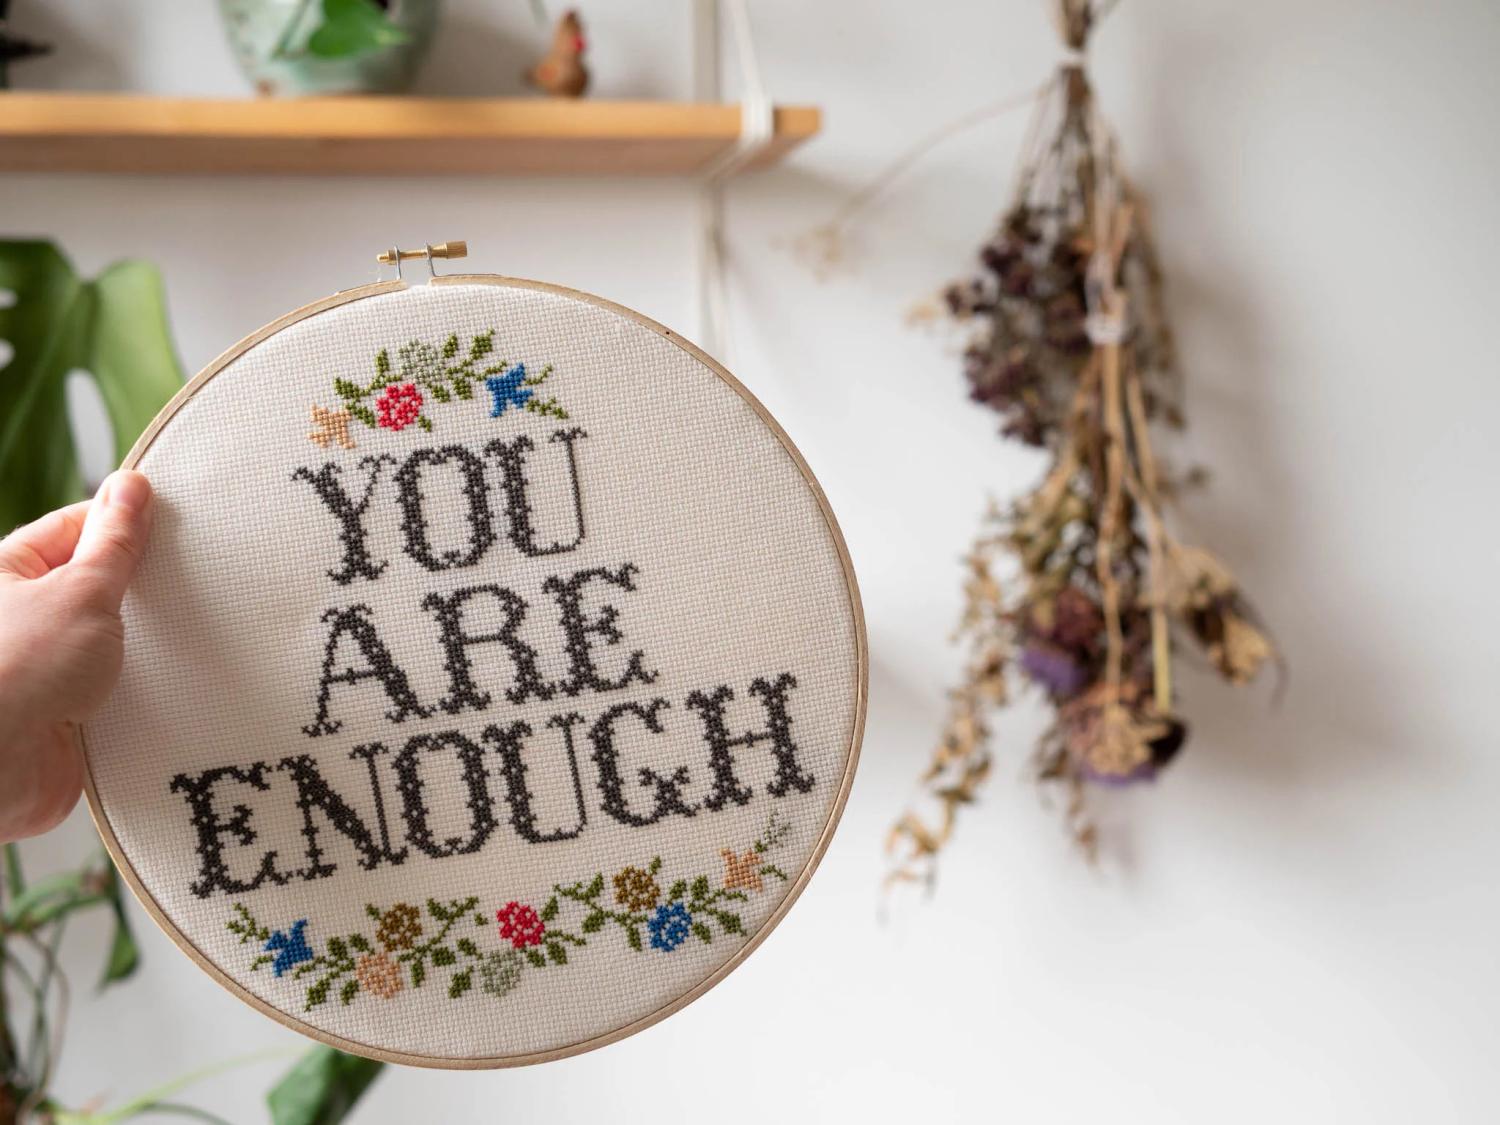 How to Finish YourCross Stitch